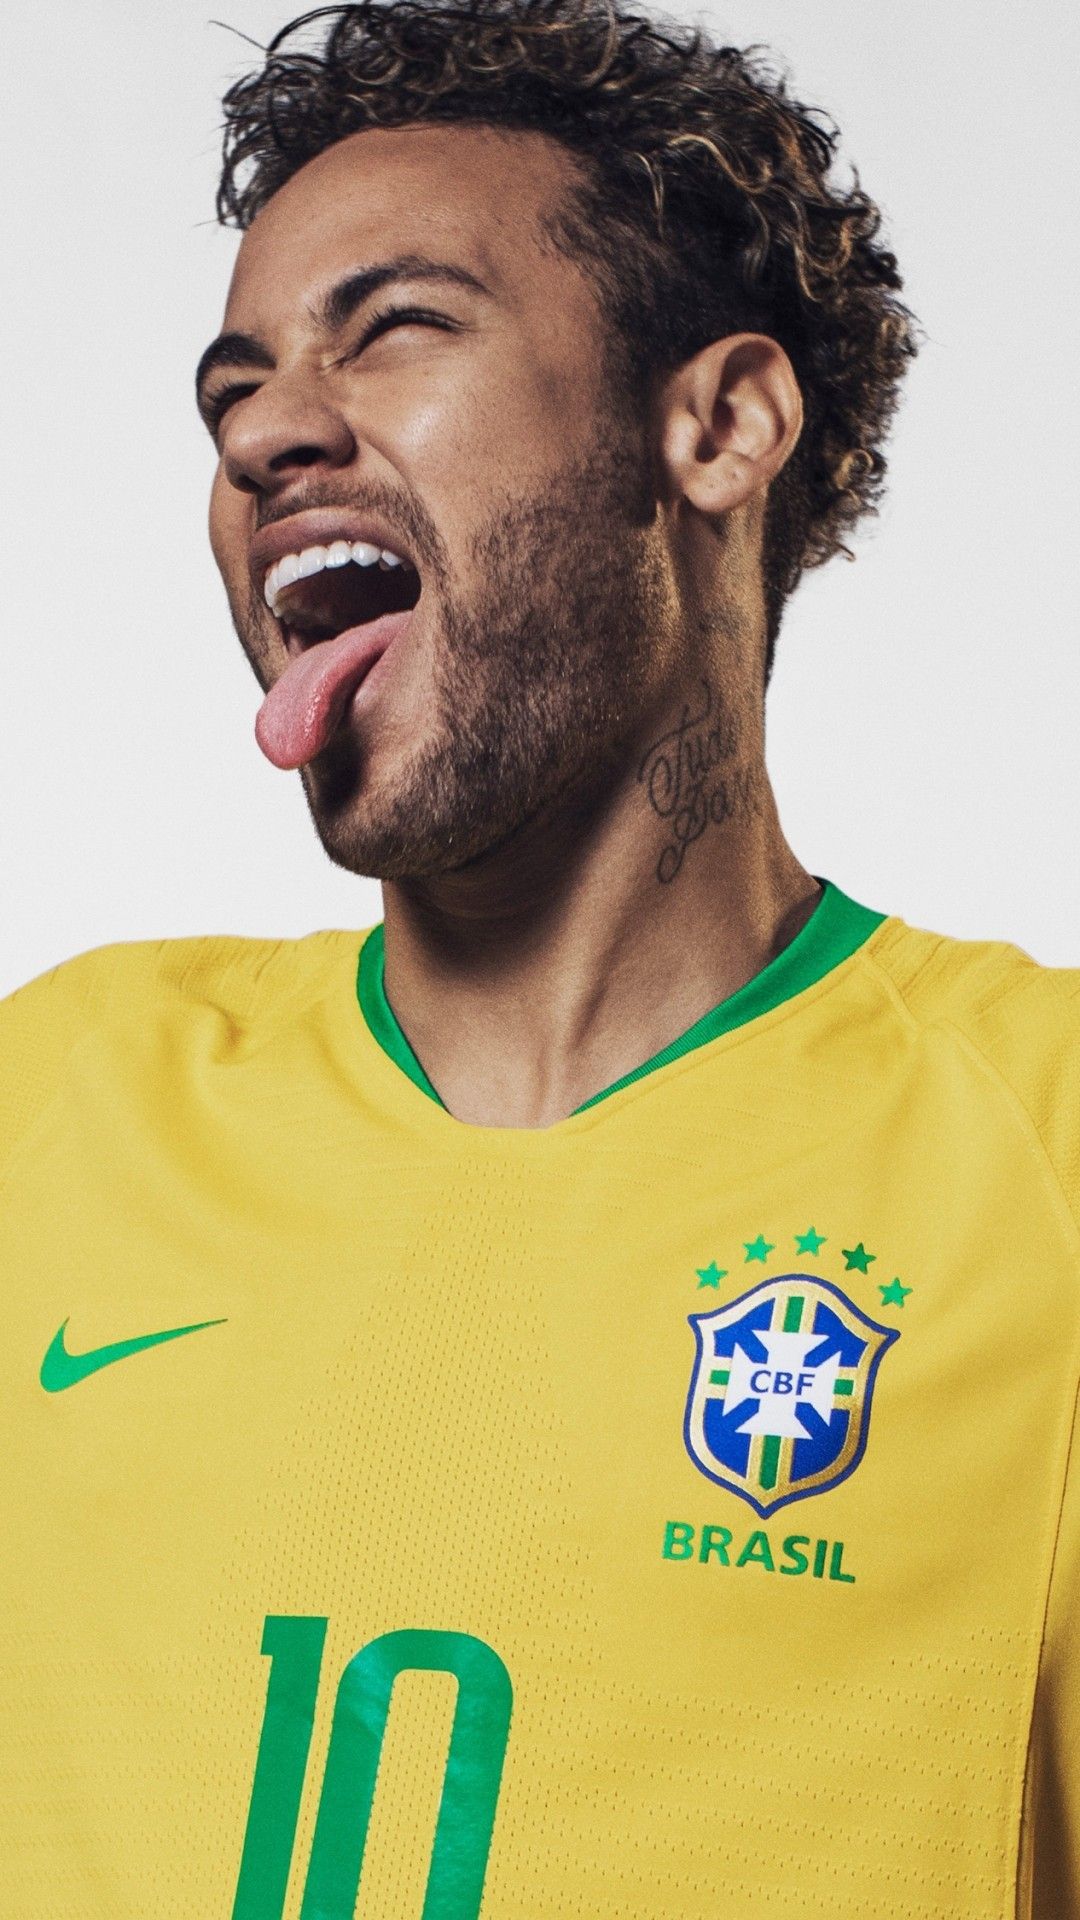 Download 1080x1920 Neymar, Brasil Wallpaper for iPhone iPhone 7 Plus, iPhone 6+, Sony Xperia Z, HTC One